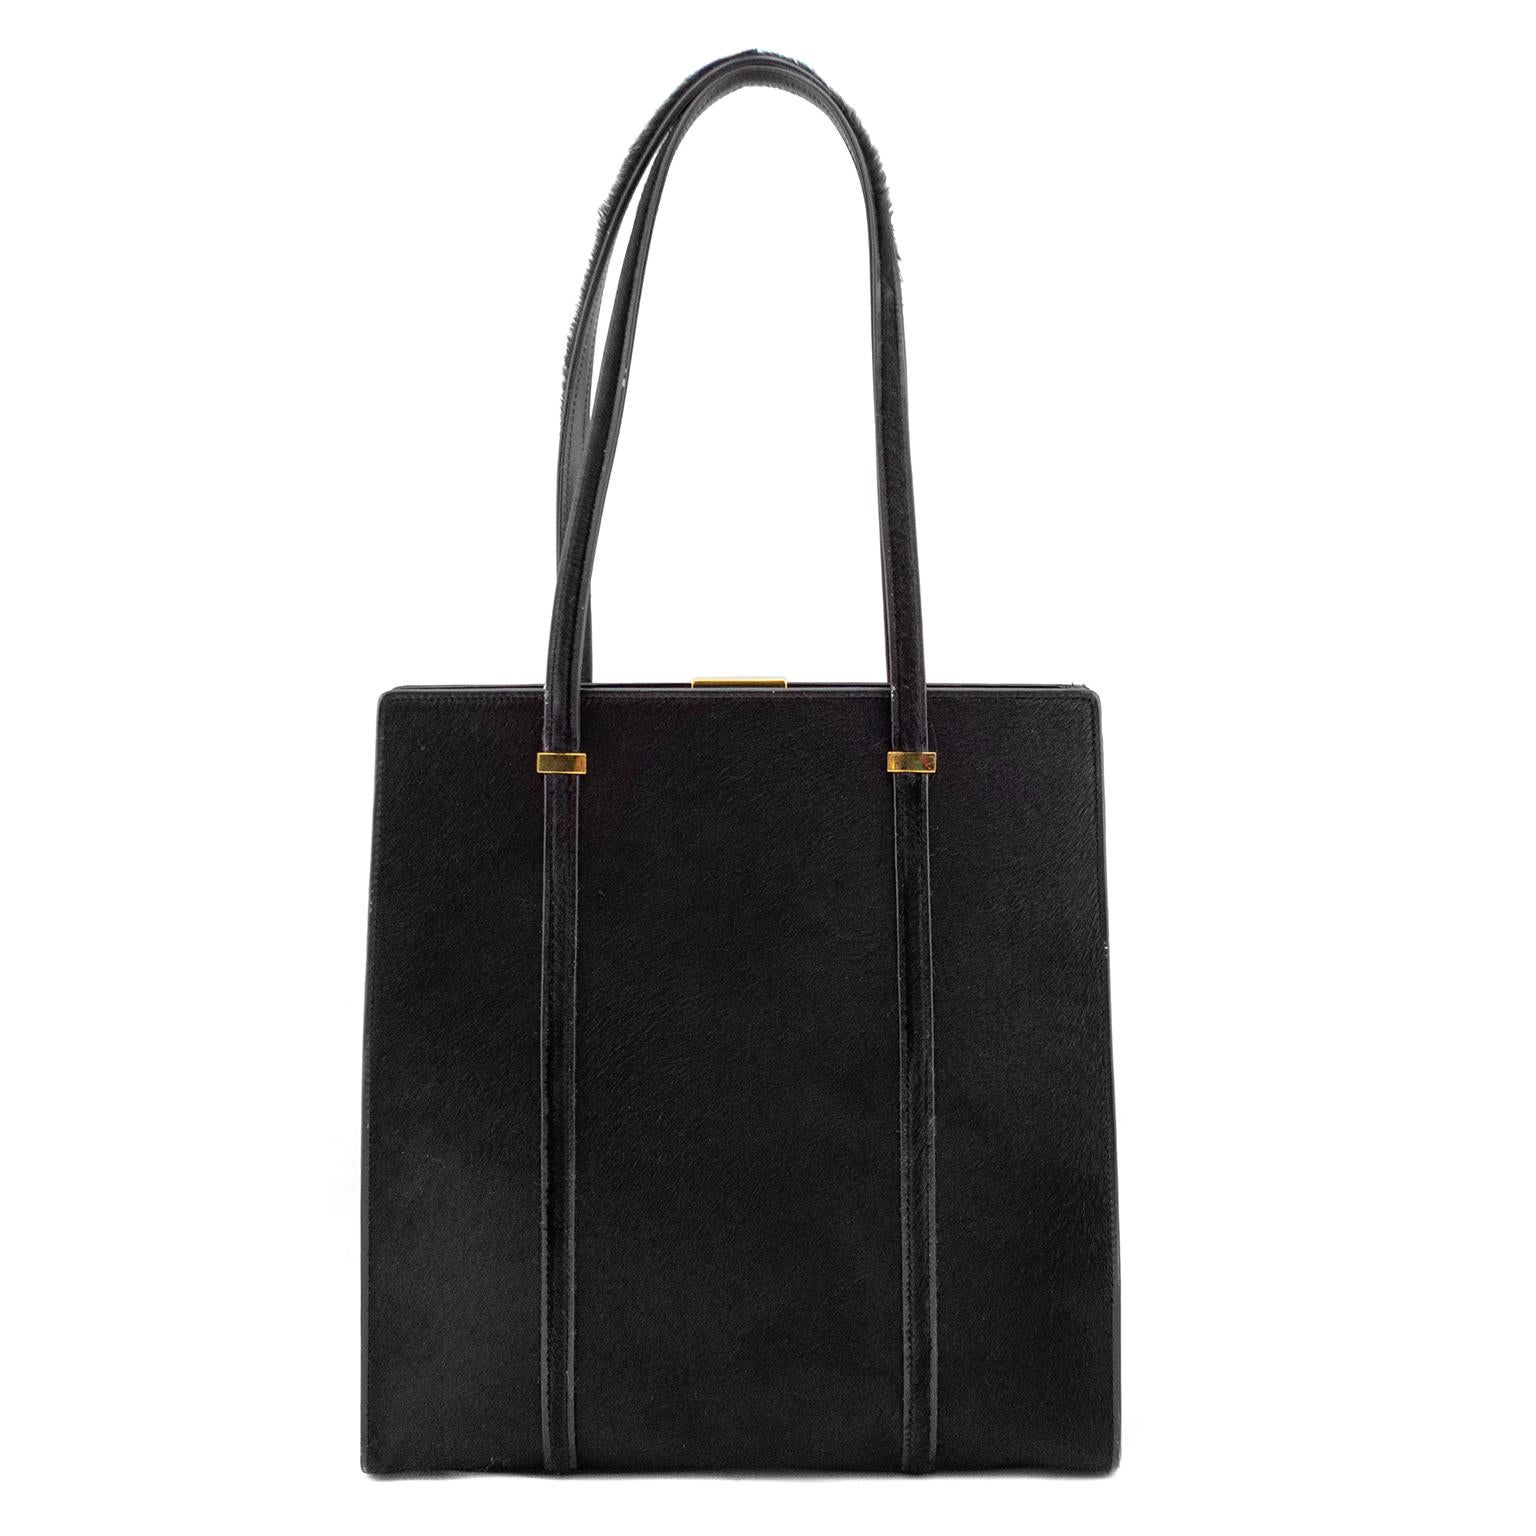 Uber chic and minimalistic 1990's Gucci frame bag. Black pony hair with monochromatic black leather trim and gold hardware. Long top handles allow to sit on shoulder. Gold metal Gucci engraved metal closure. Black leather interior with single